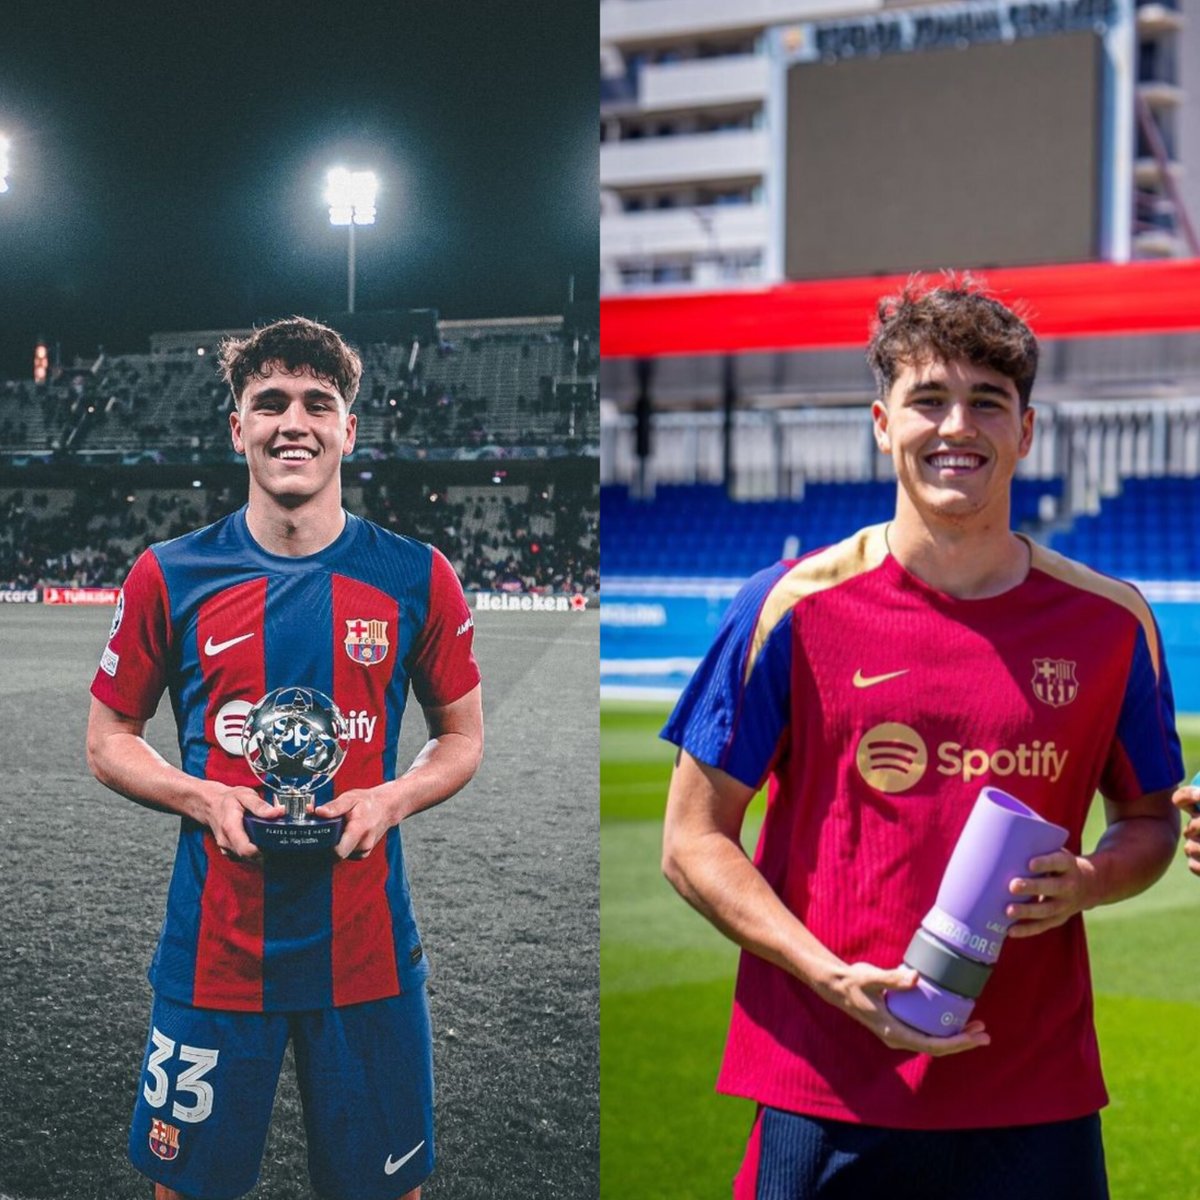 Went from balling in the youth league to winning UCL motm and La liga U23 POTM in the same season. Insane breakthrough season we are witnessing.